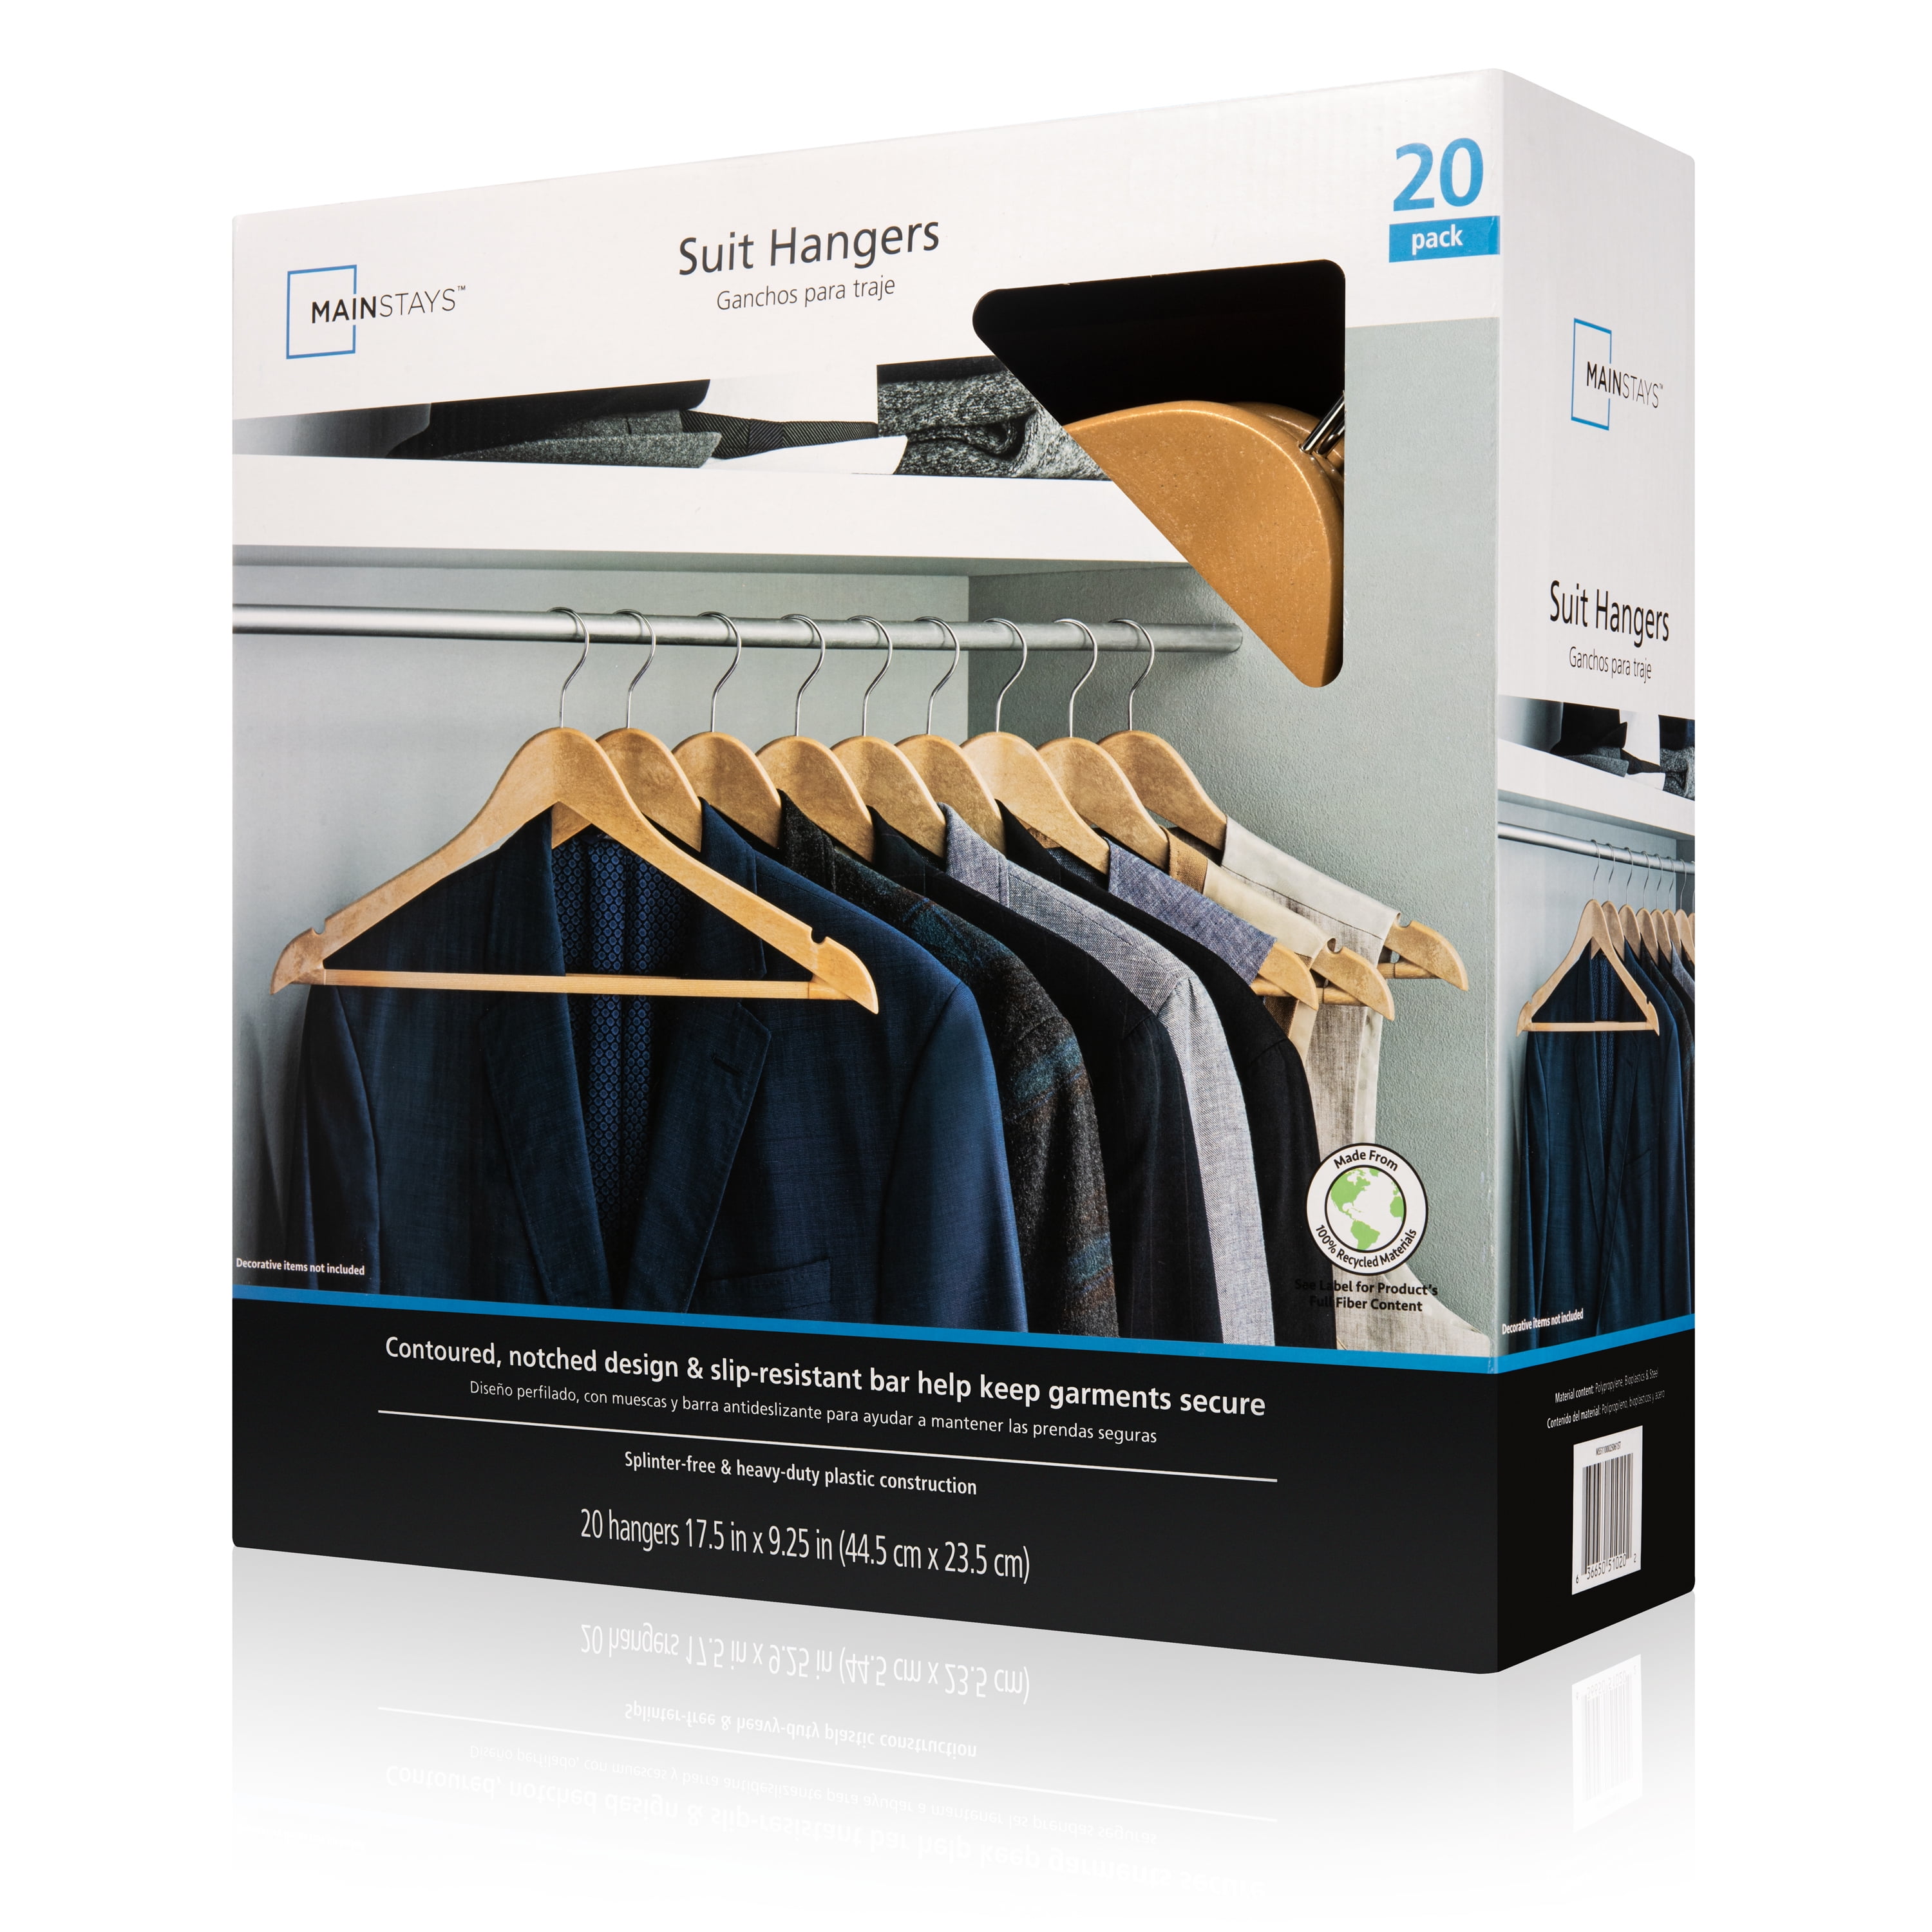 Standard Plastic Hangers Japanese-style Durable Shirt Hangers for Laundry  and Everyday Use